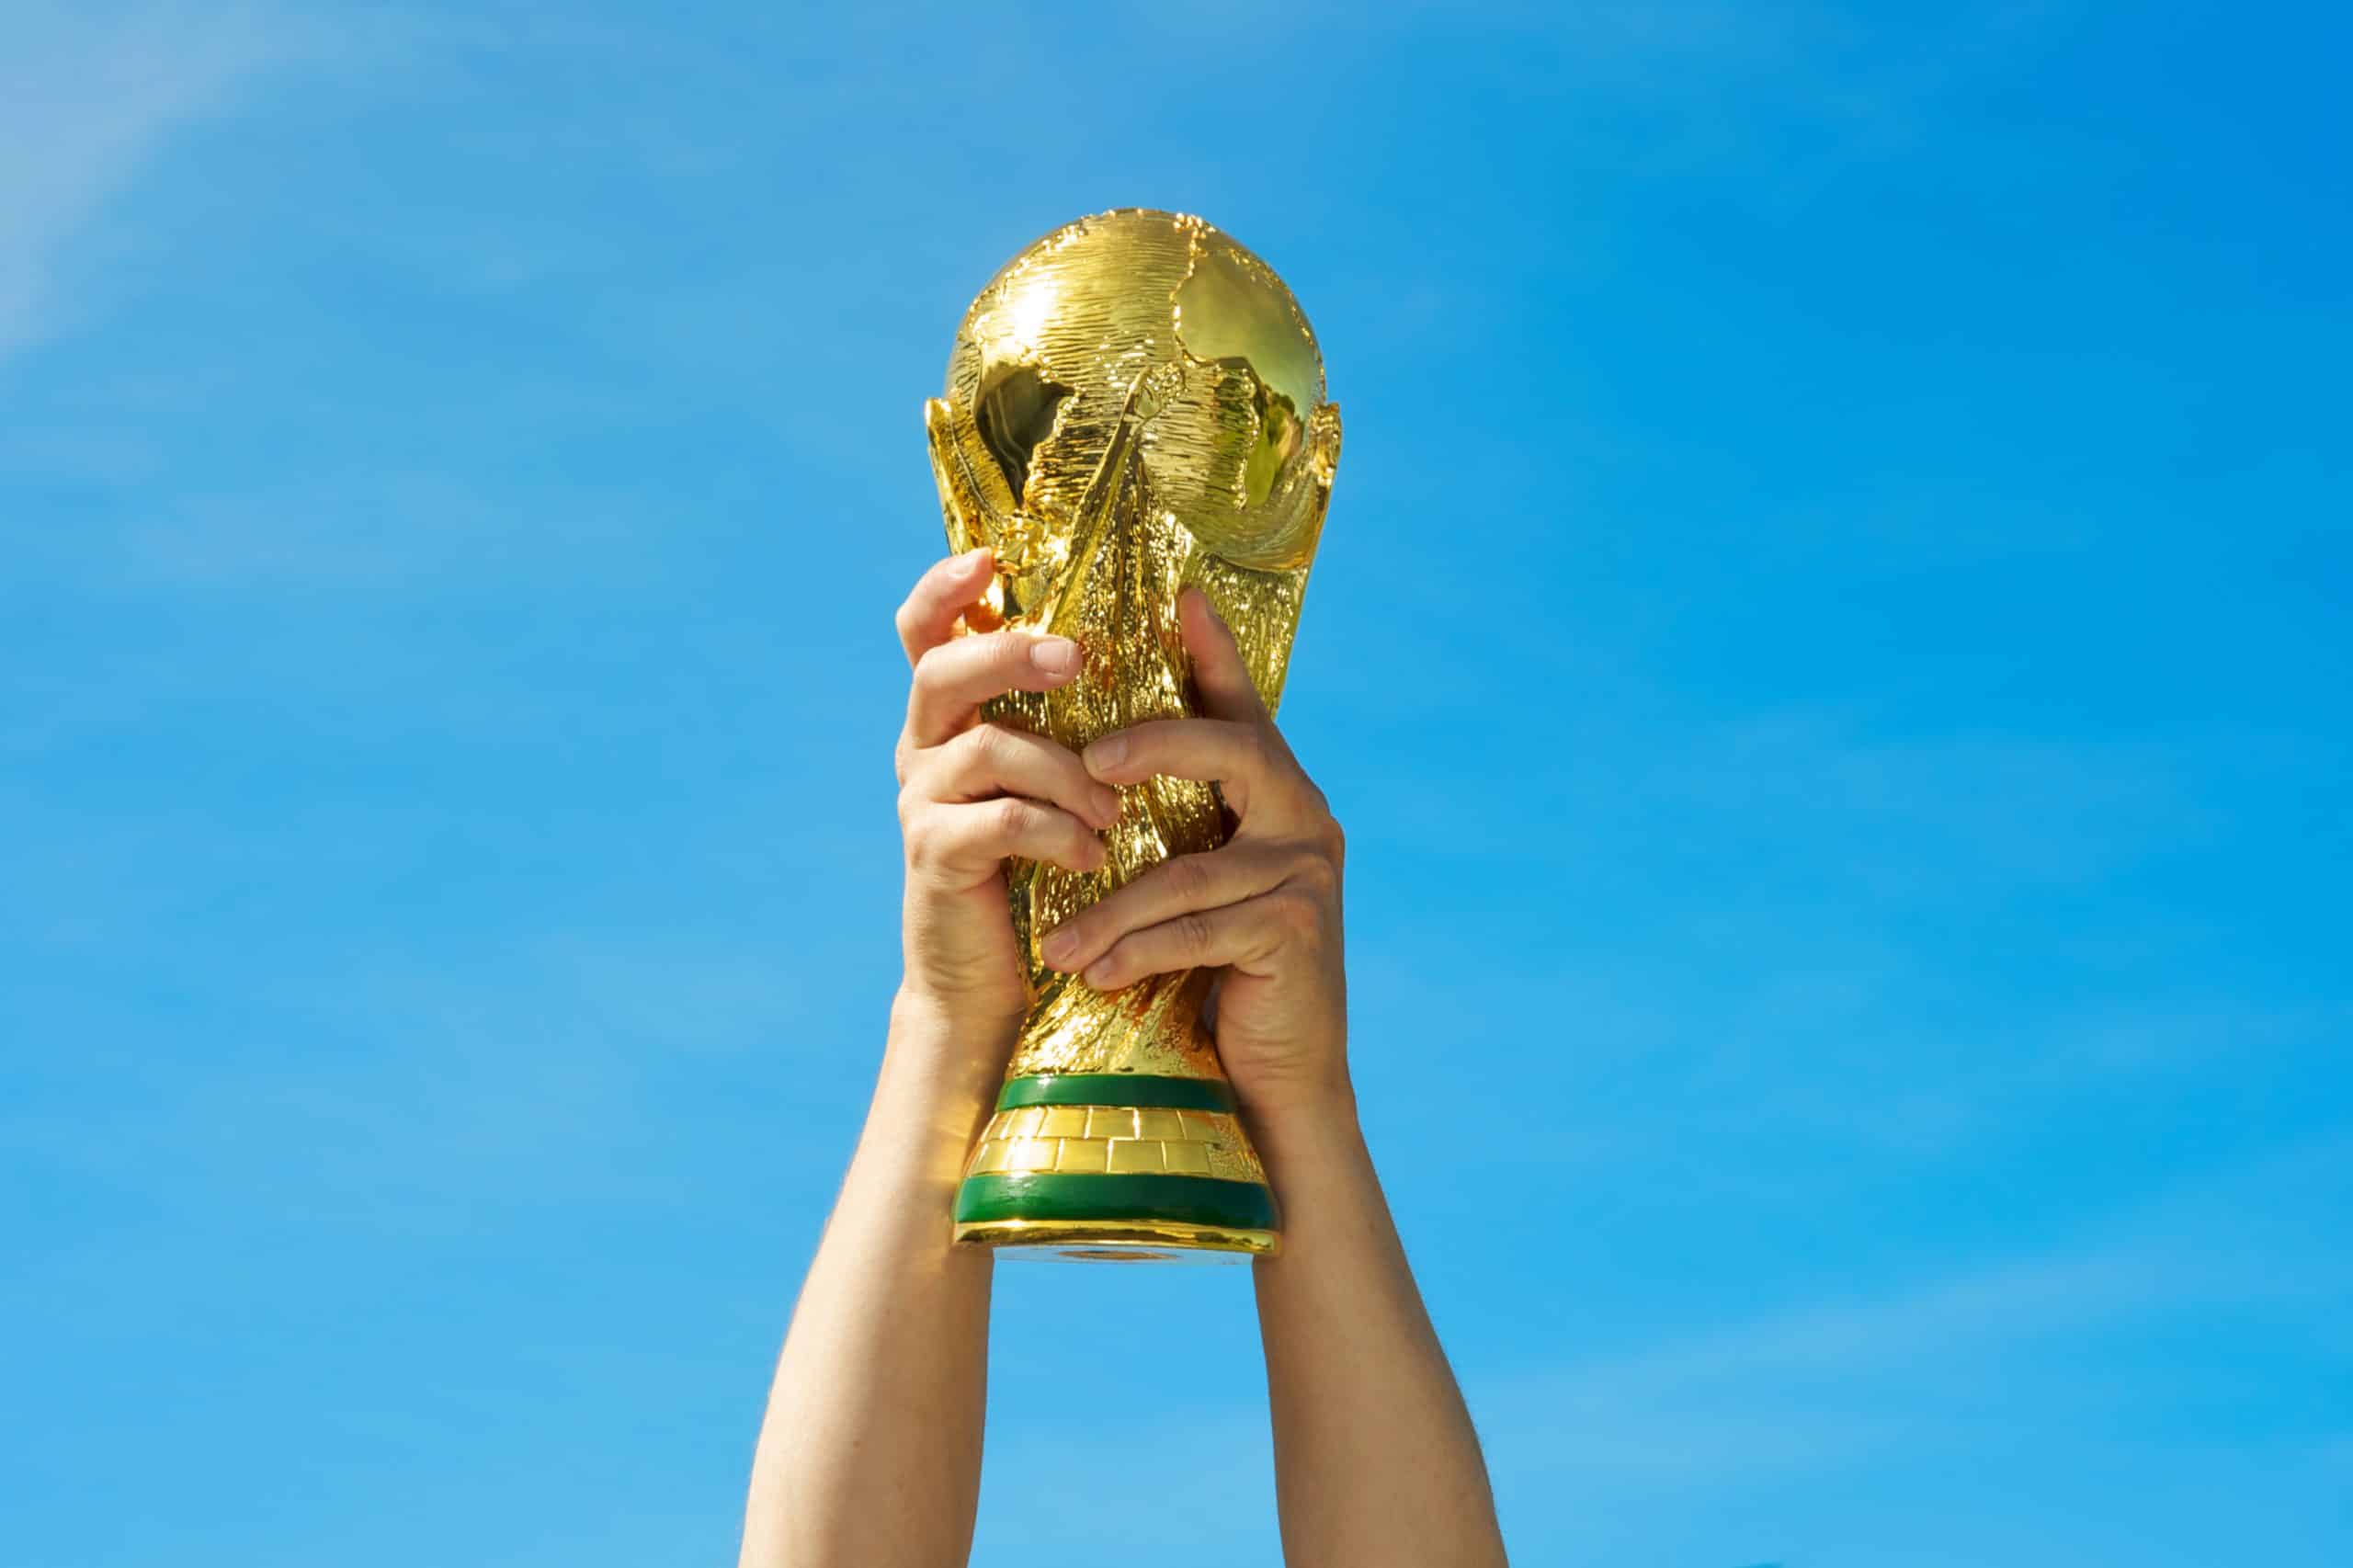 From classic football chants, to old tournaments – here’s five World Cup campaigns that caught our eyes